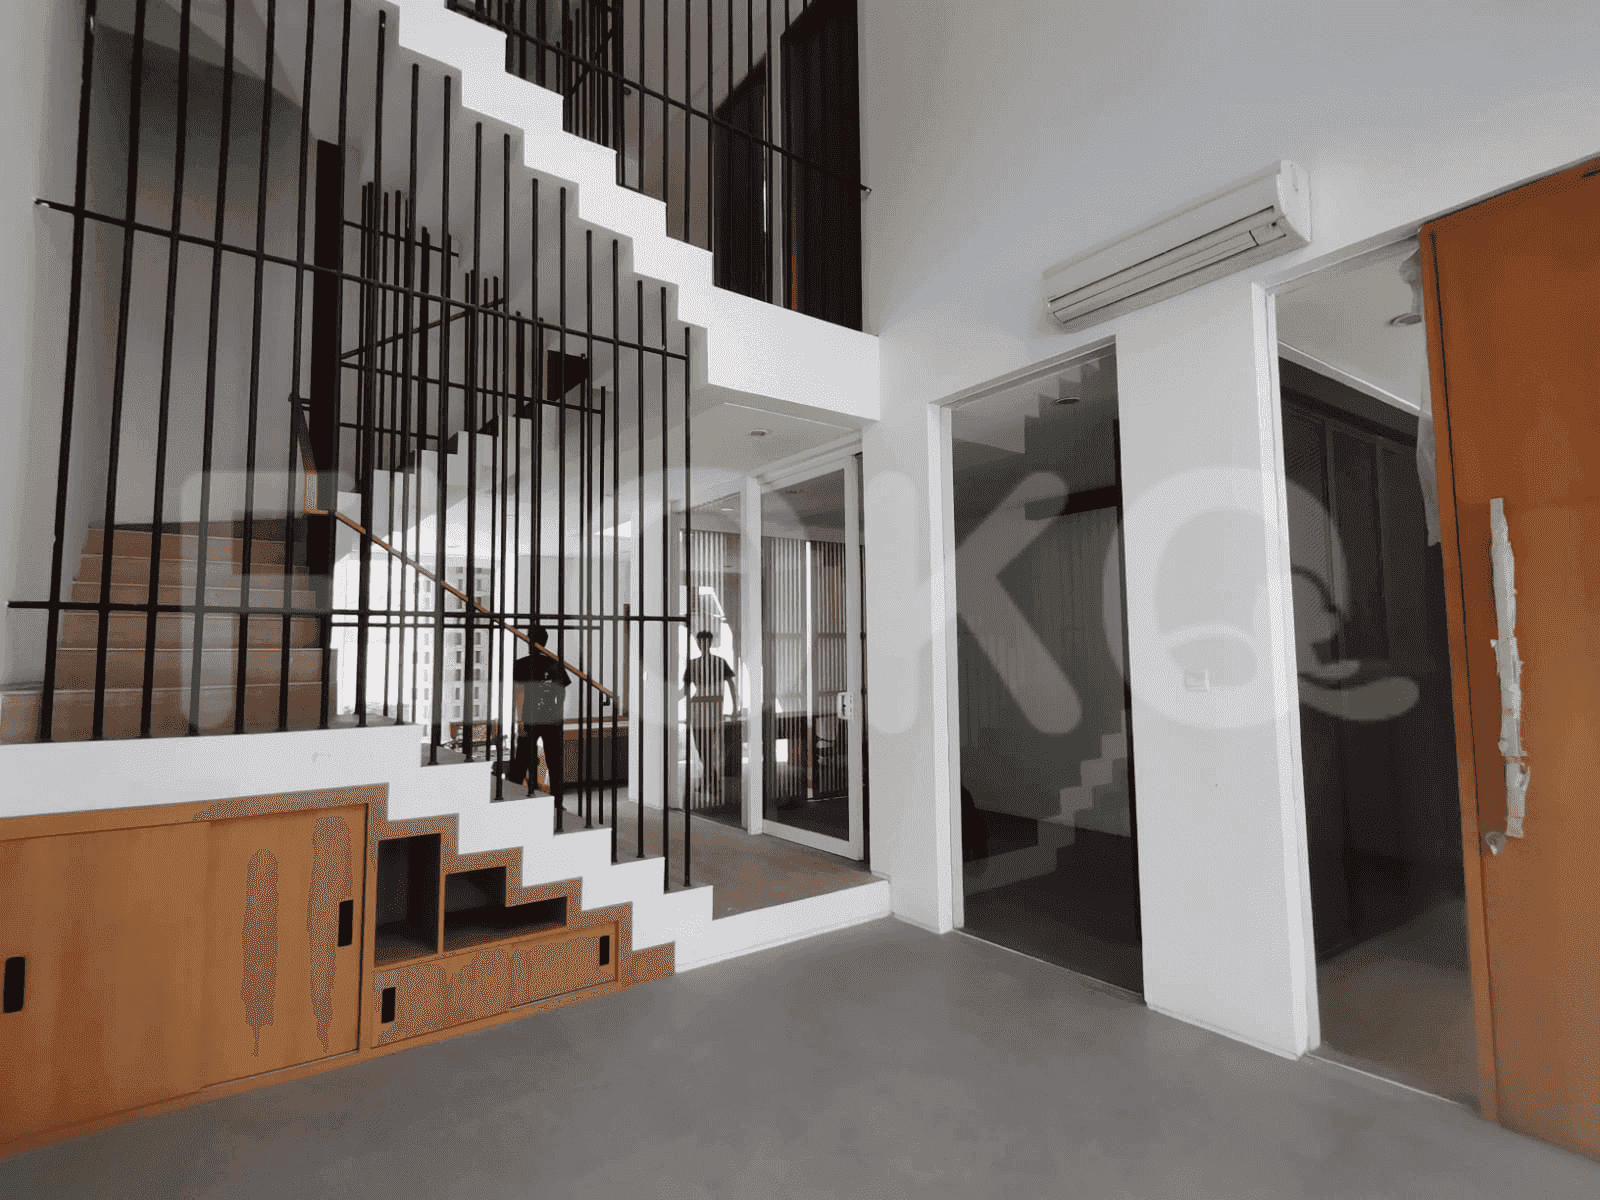 350 sqm, 3 BR house for rent in Pasar Minggu 3